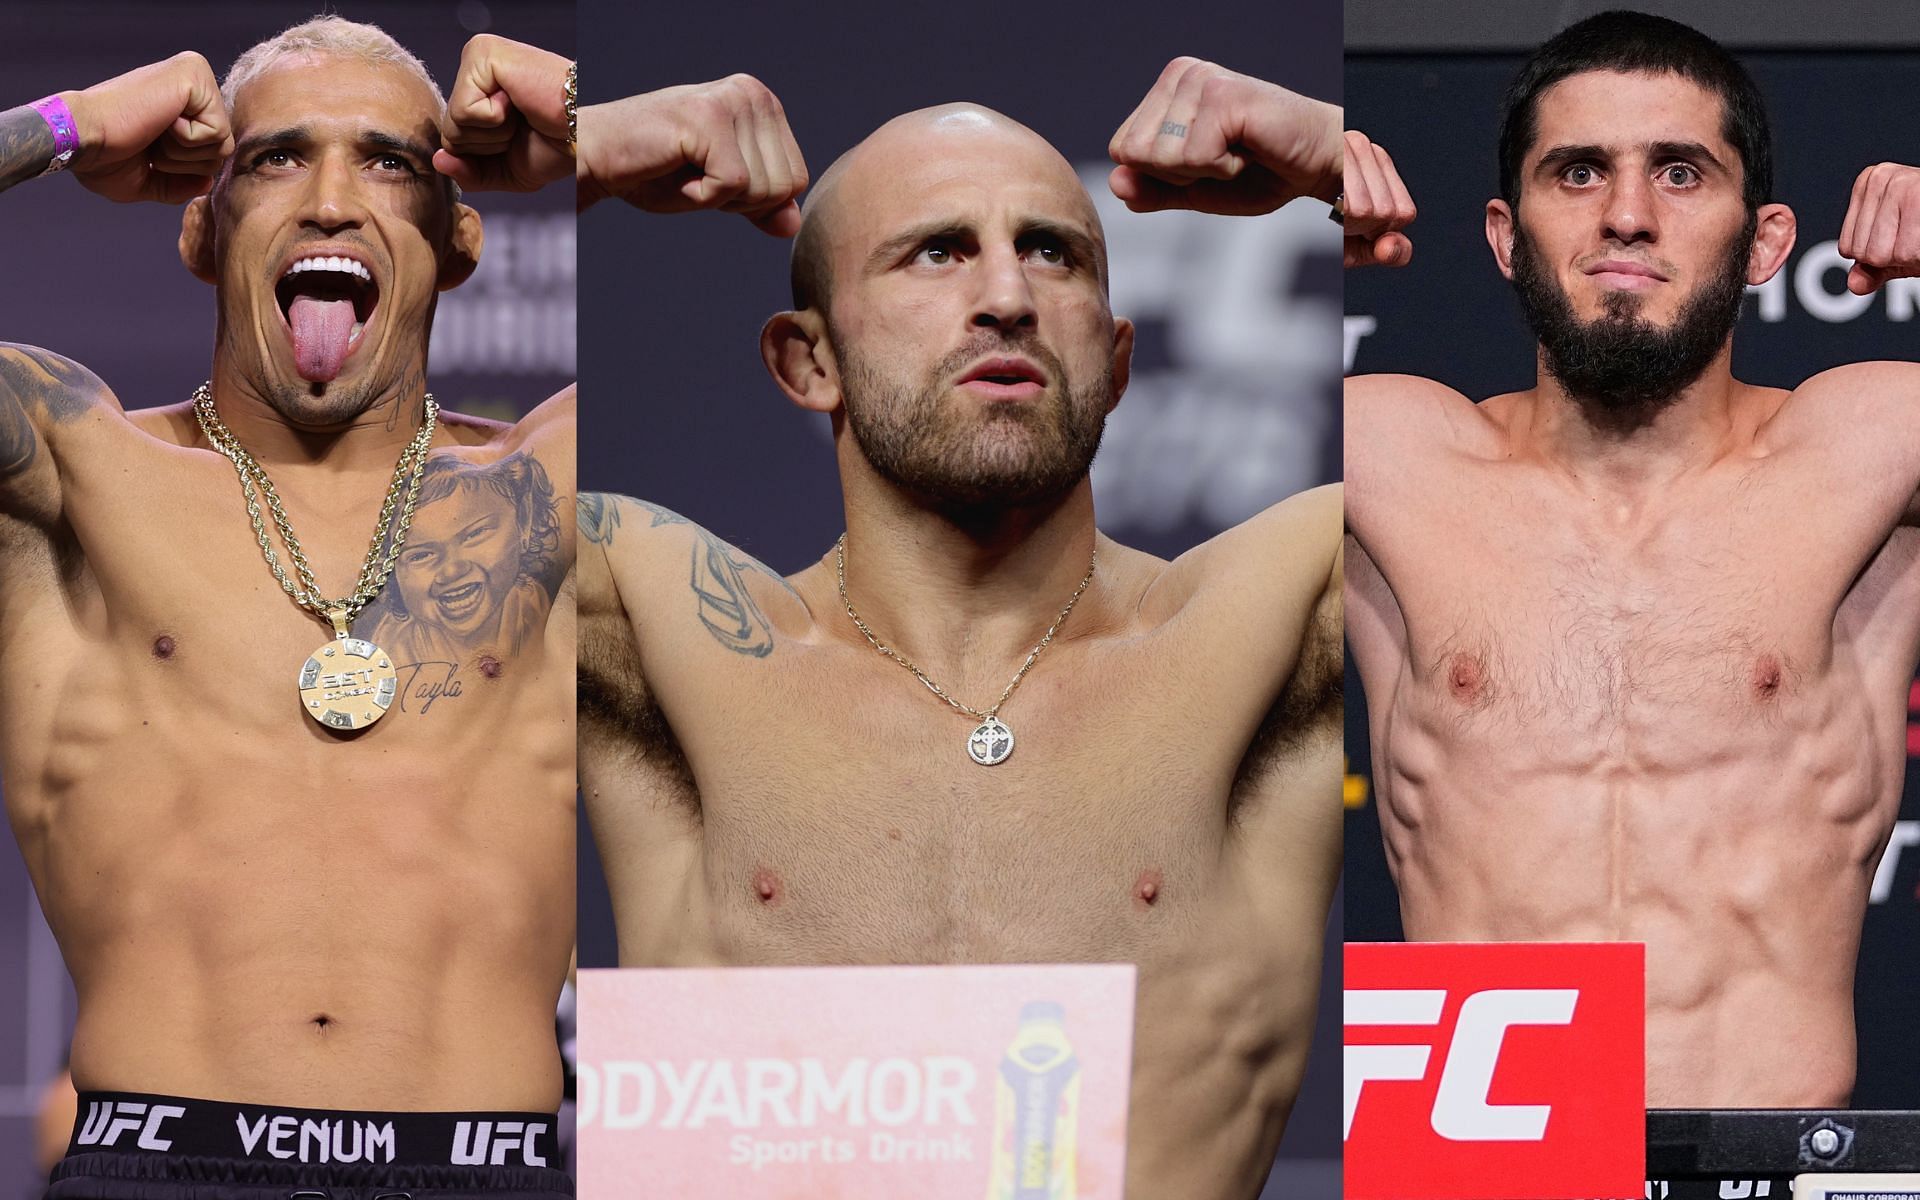 Charles Oliveira (left), Alexander Volkanovski (center), and Islam Makhachev (right). [Images courtesy: all images from Getty Images]